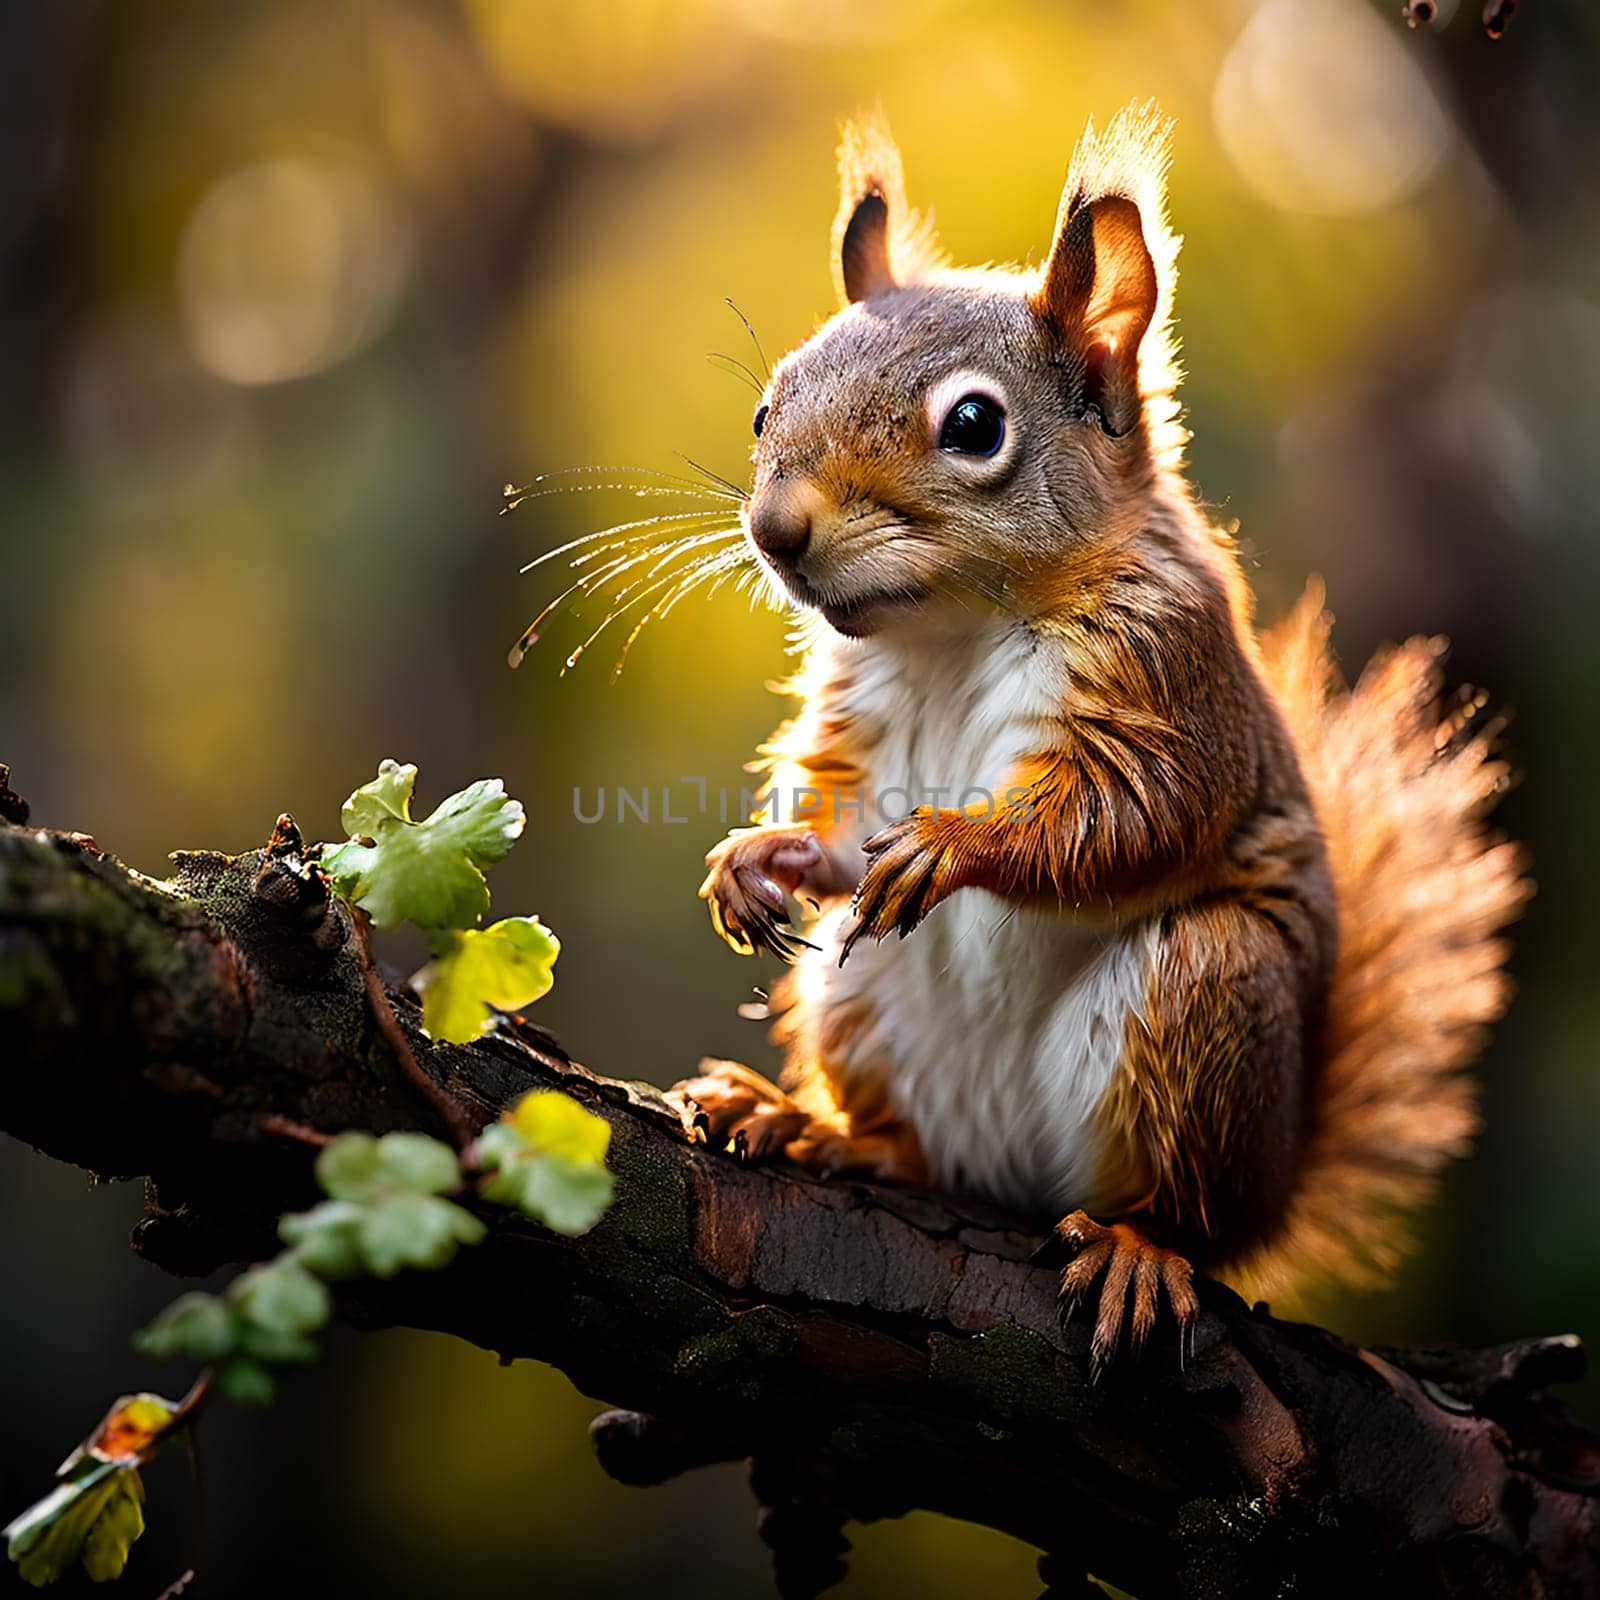 Nature's Acrobats: Capturing the Agile Squirrel on a Tree Branch by Petrichor